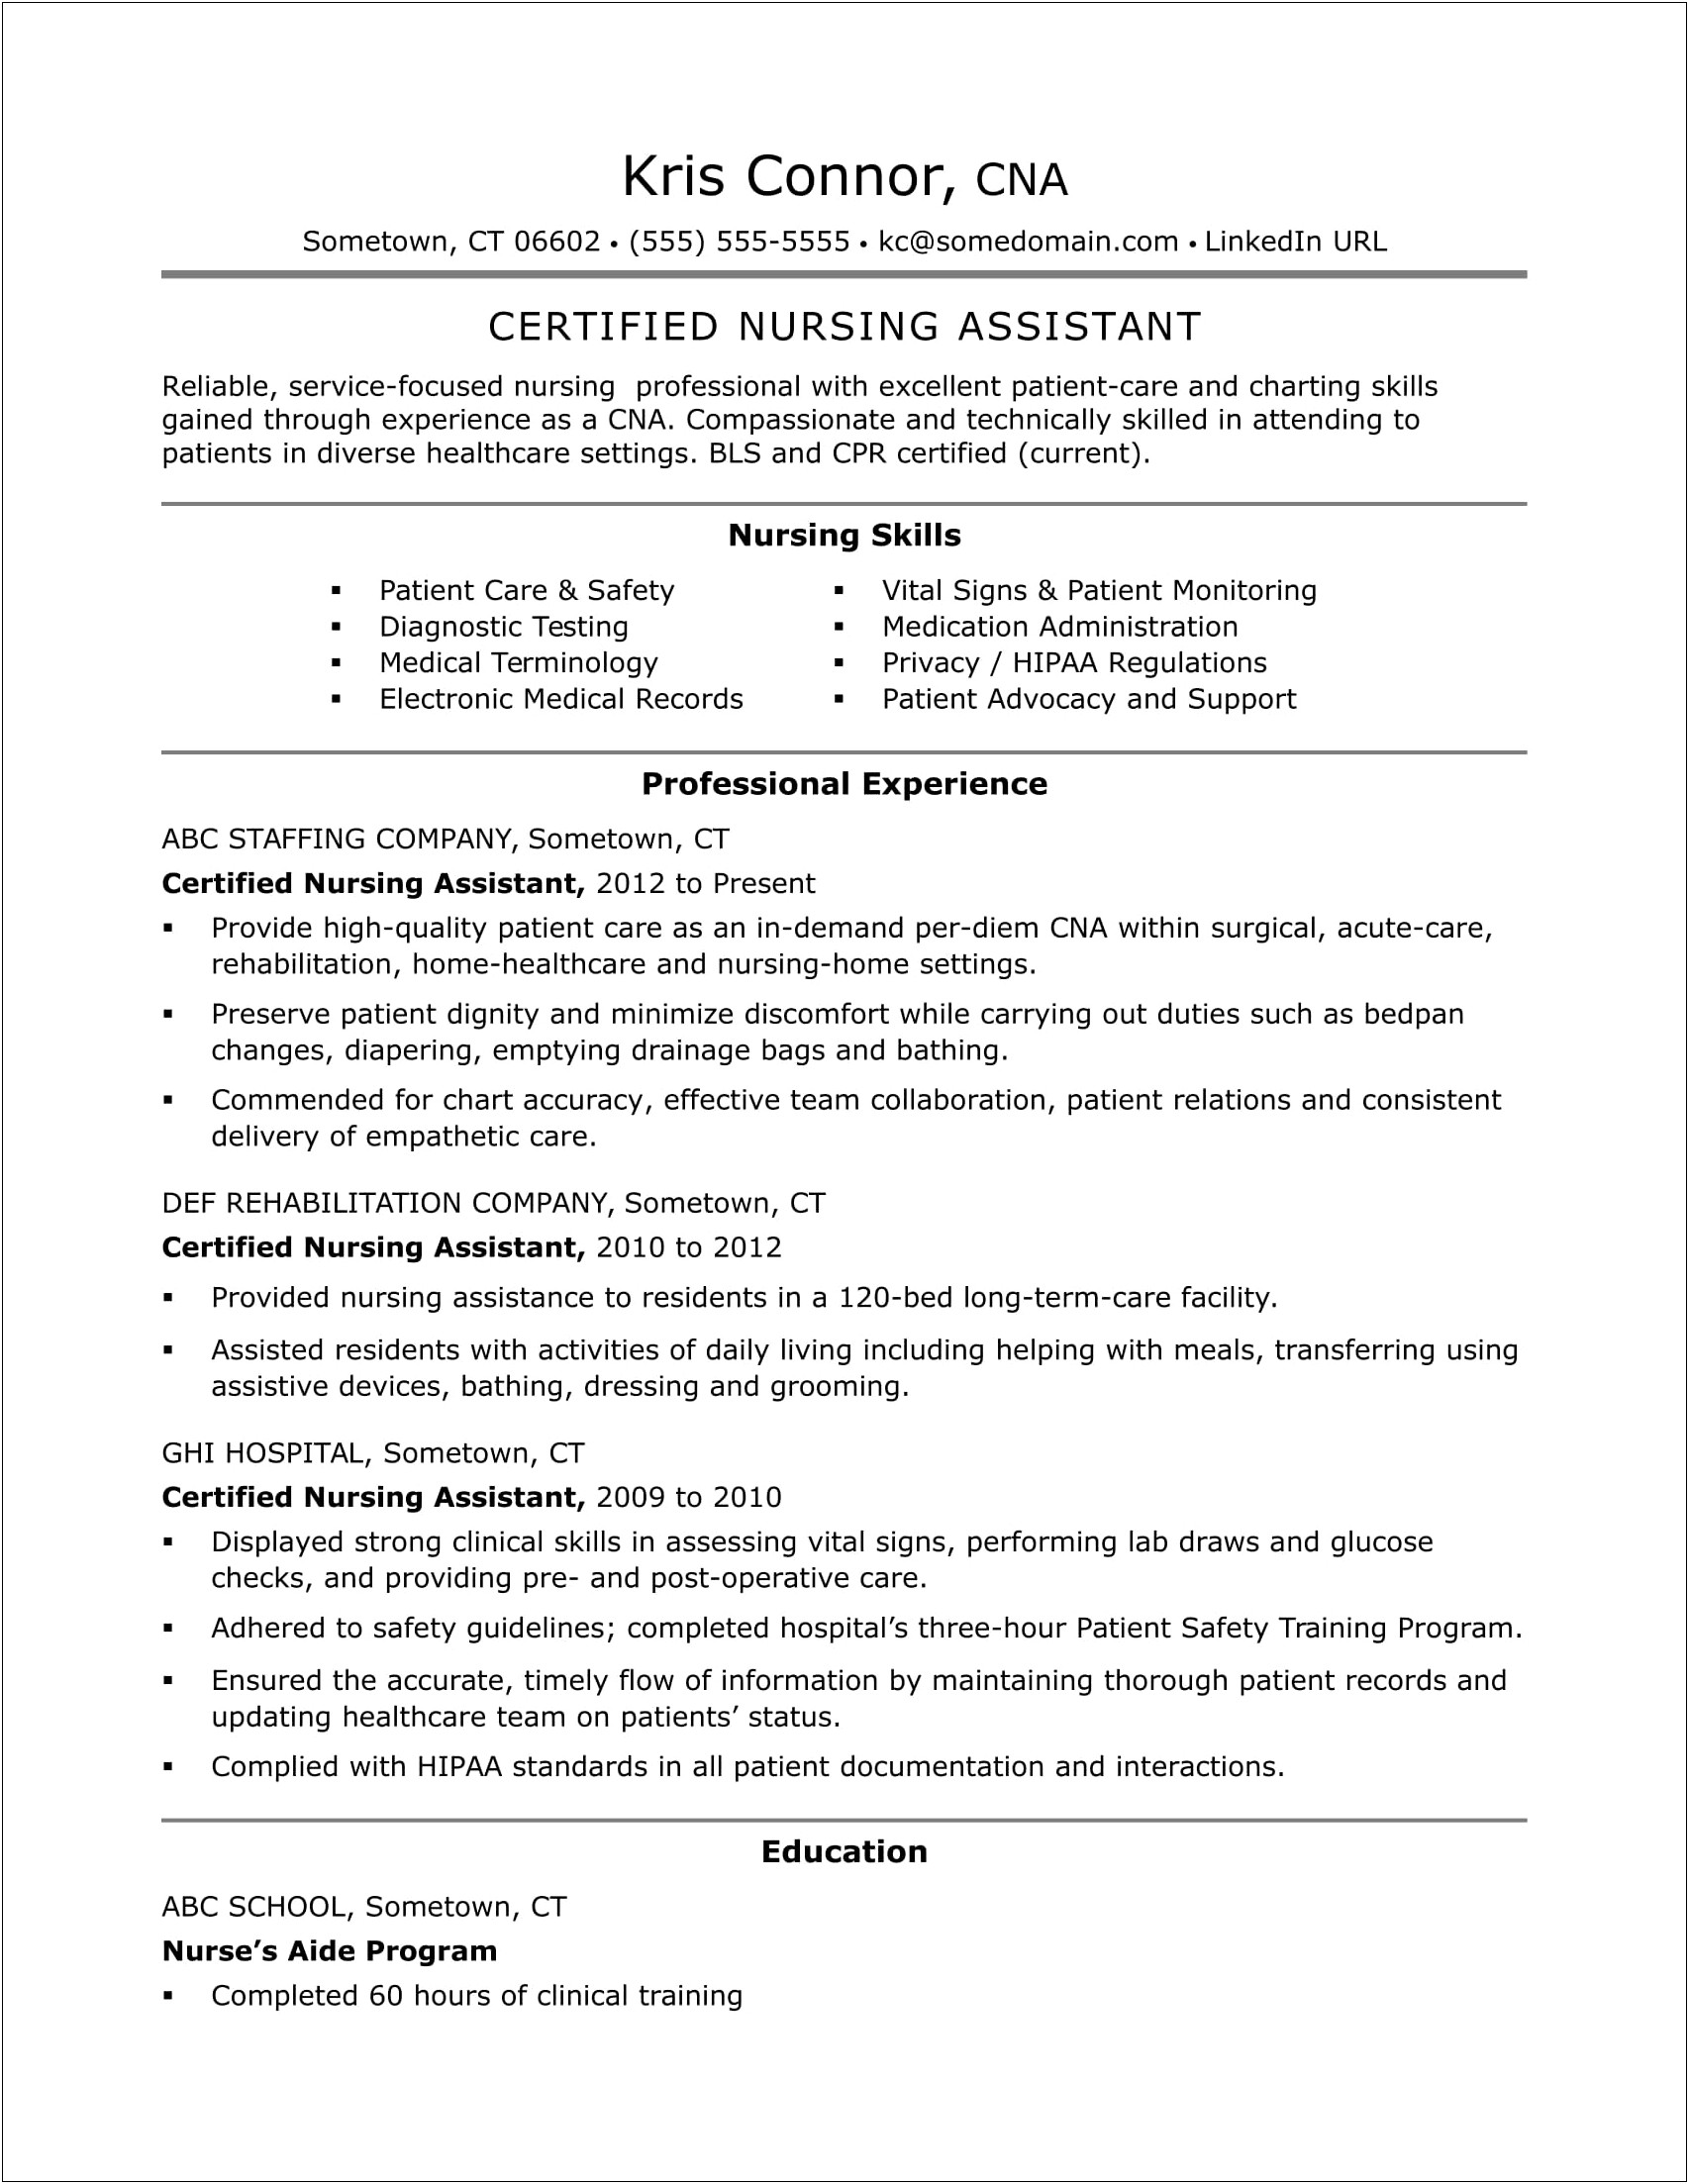 Nursing Assistant Resume Skills And Qualifications